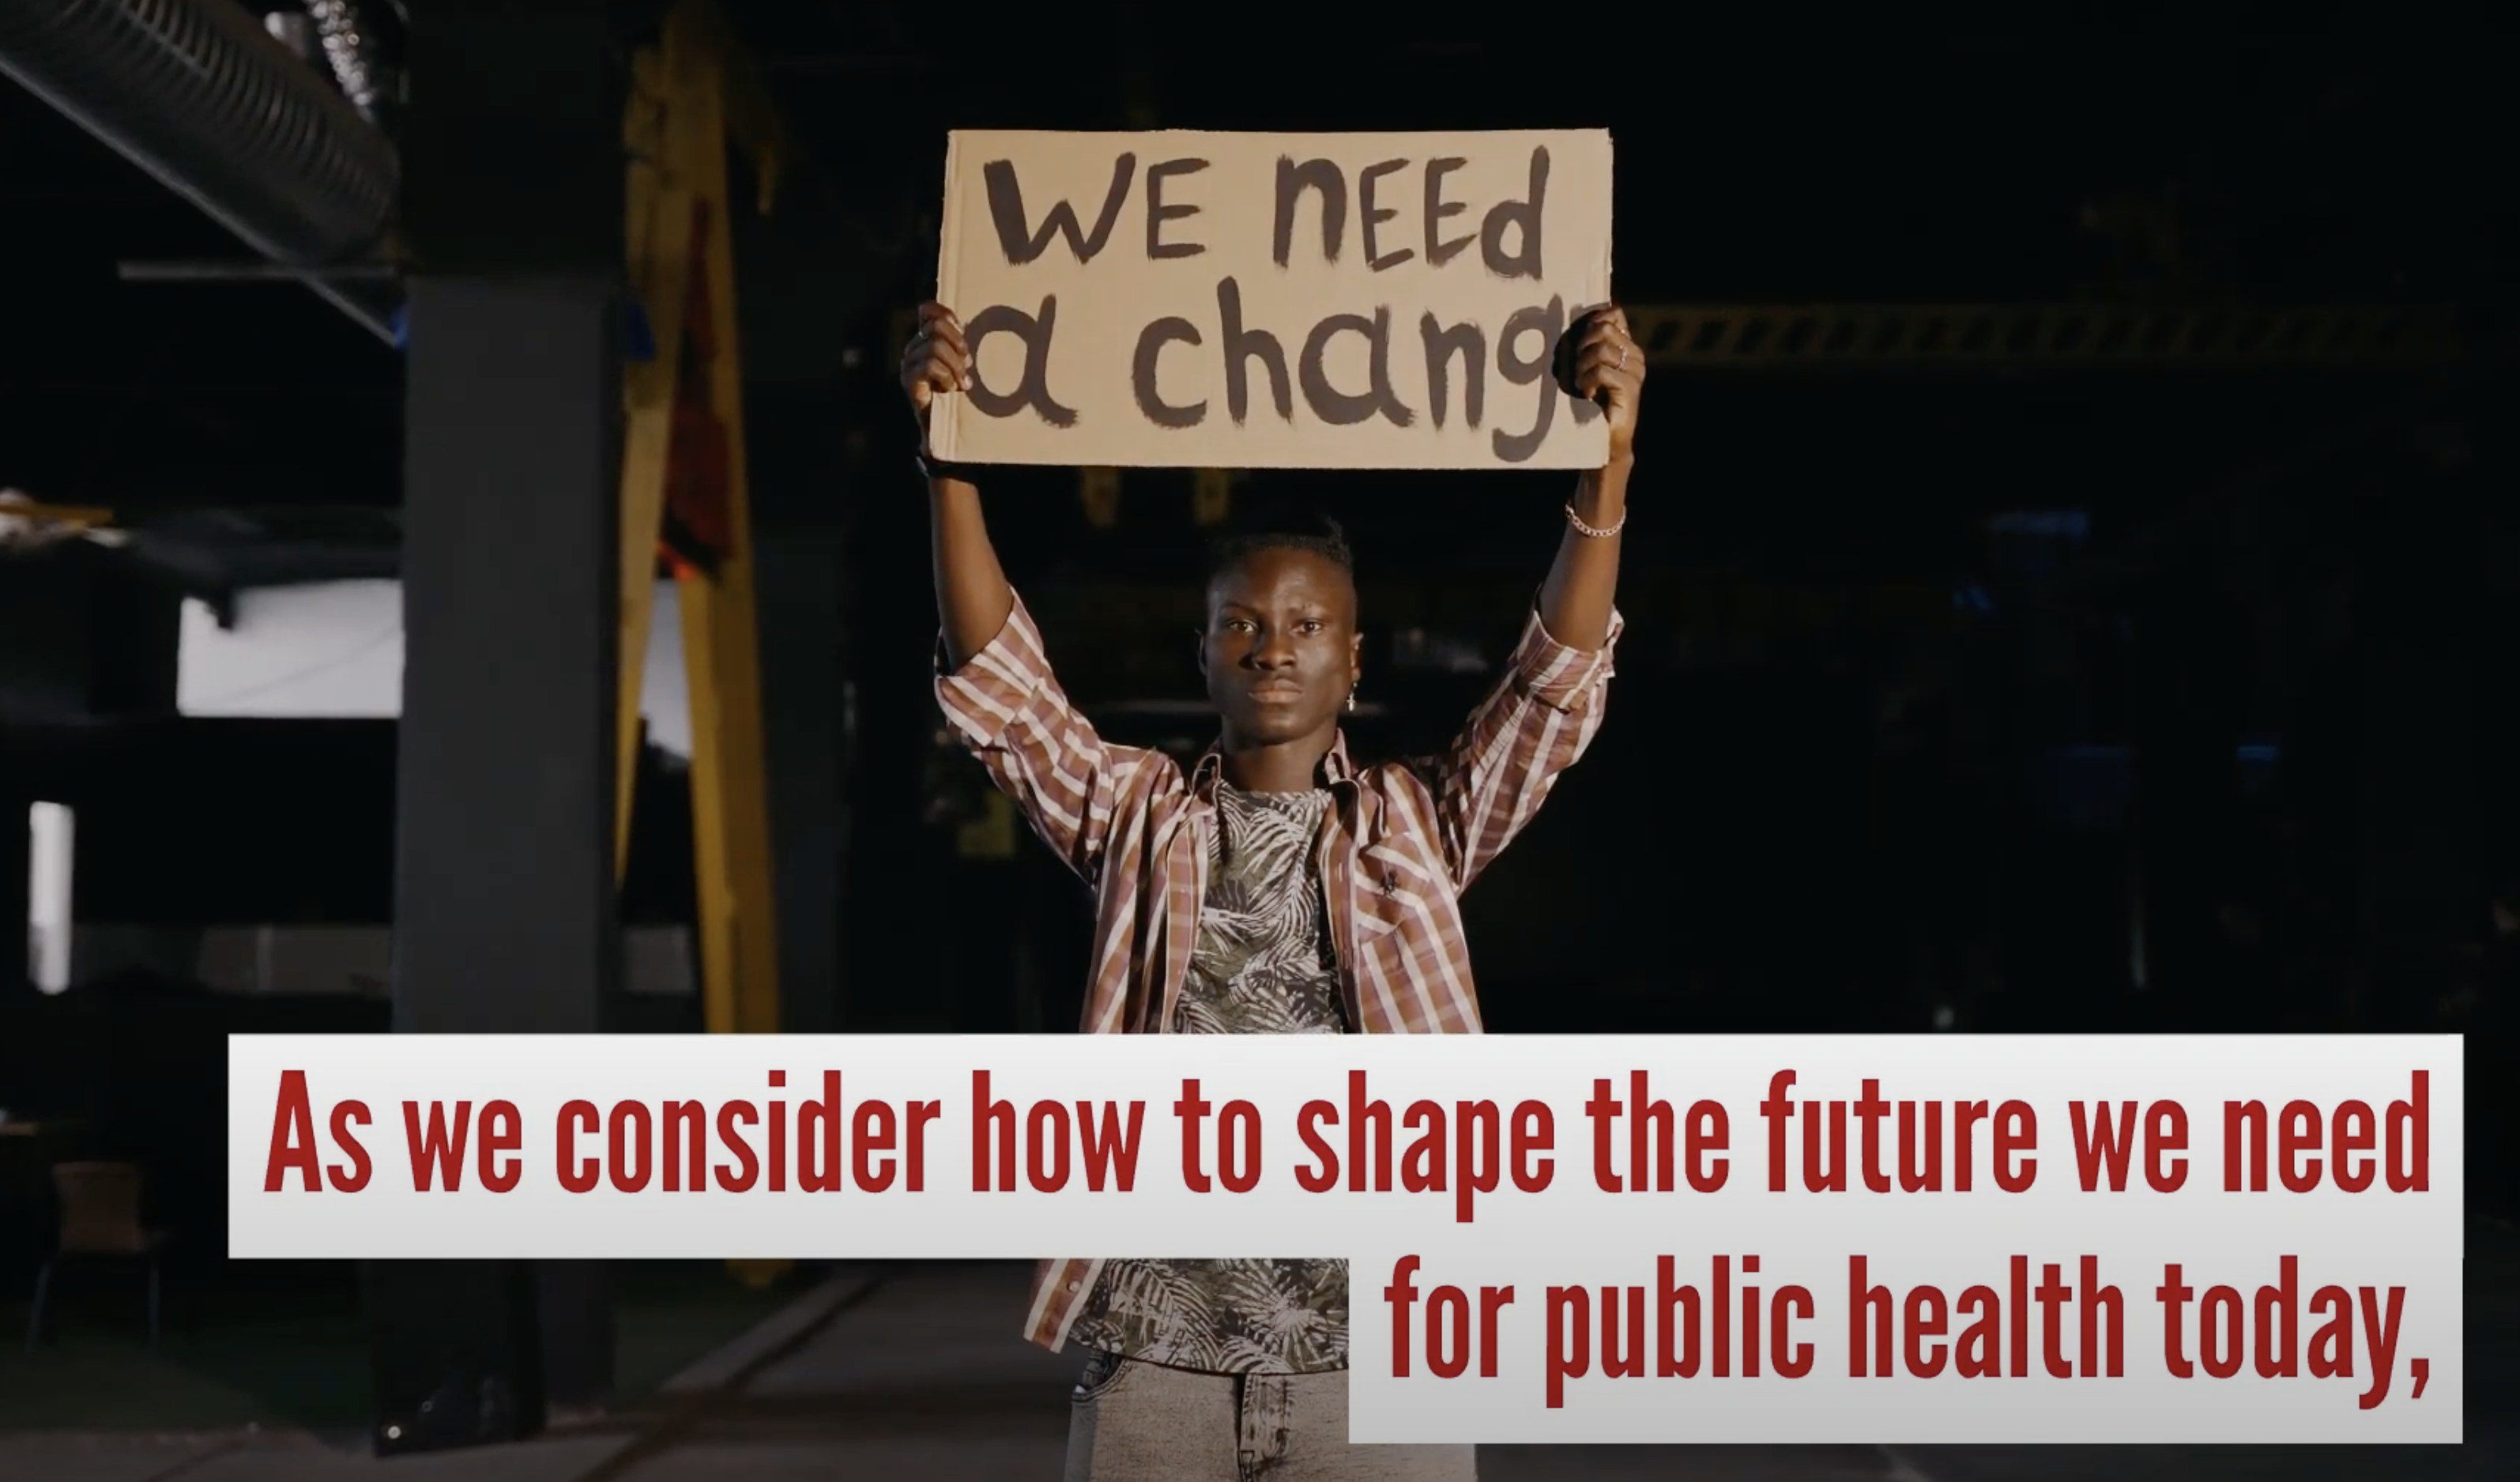 Still from video shows young Black man holding placard above his head that reads "We need a change." Words superimposed on top say "As we consider how to shape the future we need for public health today,..."